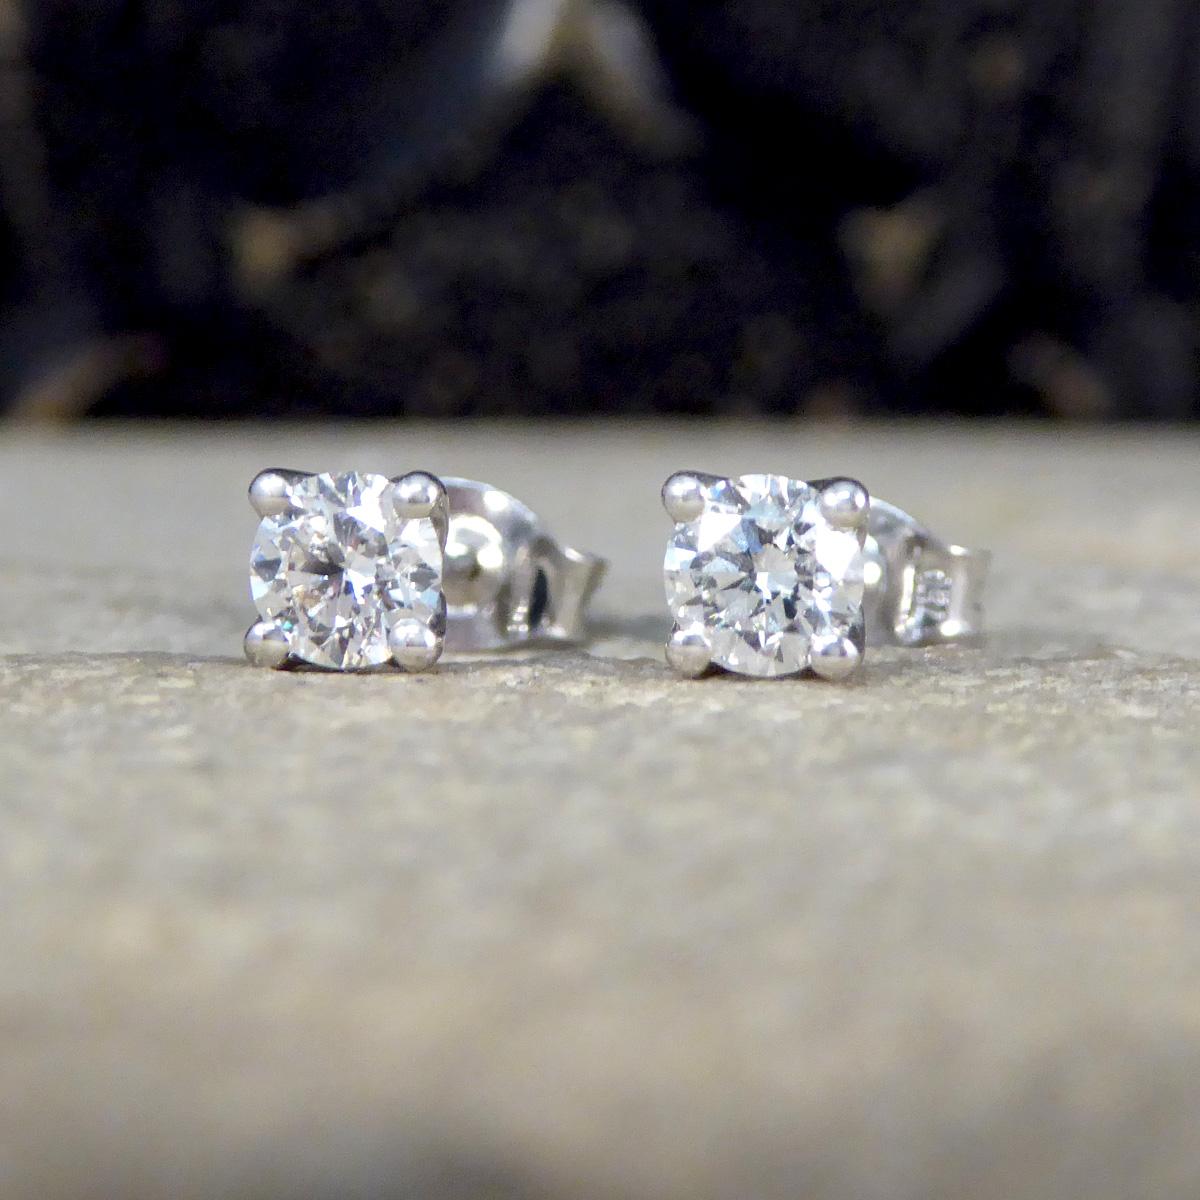 Classic Diamond Stud Earrings in 18ct White Gold In New Condition For Sale In Yorkshire, West Yorkshire